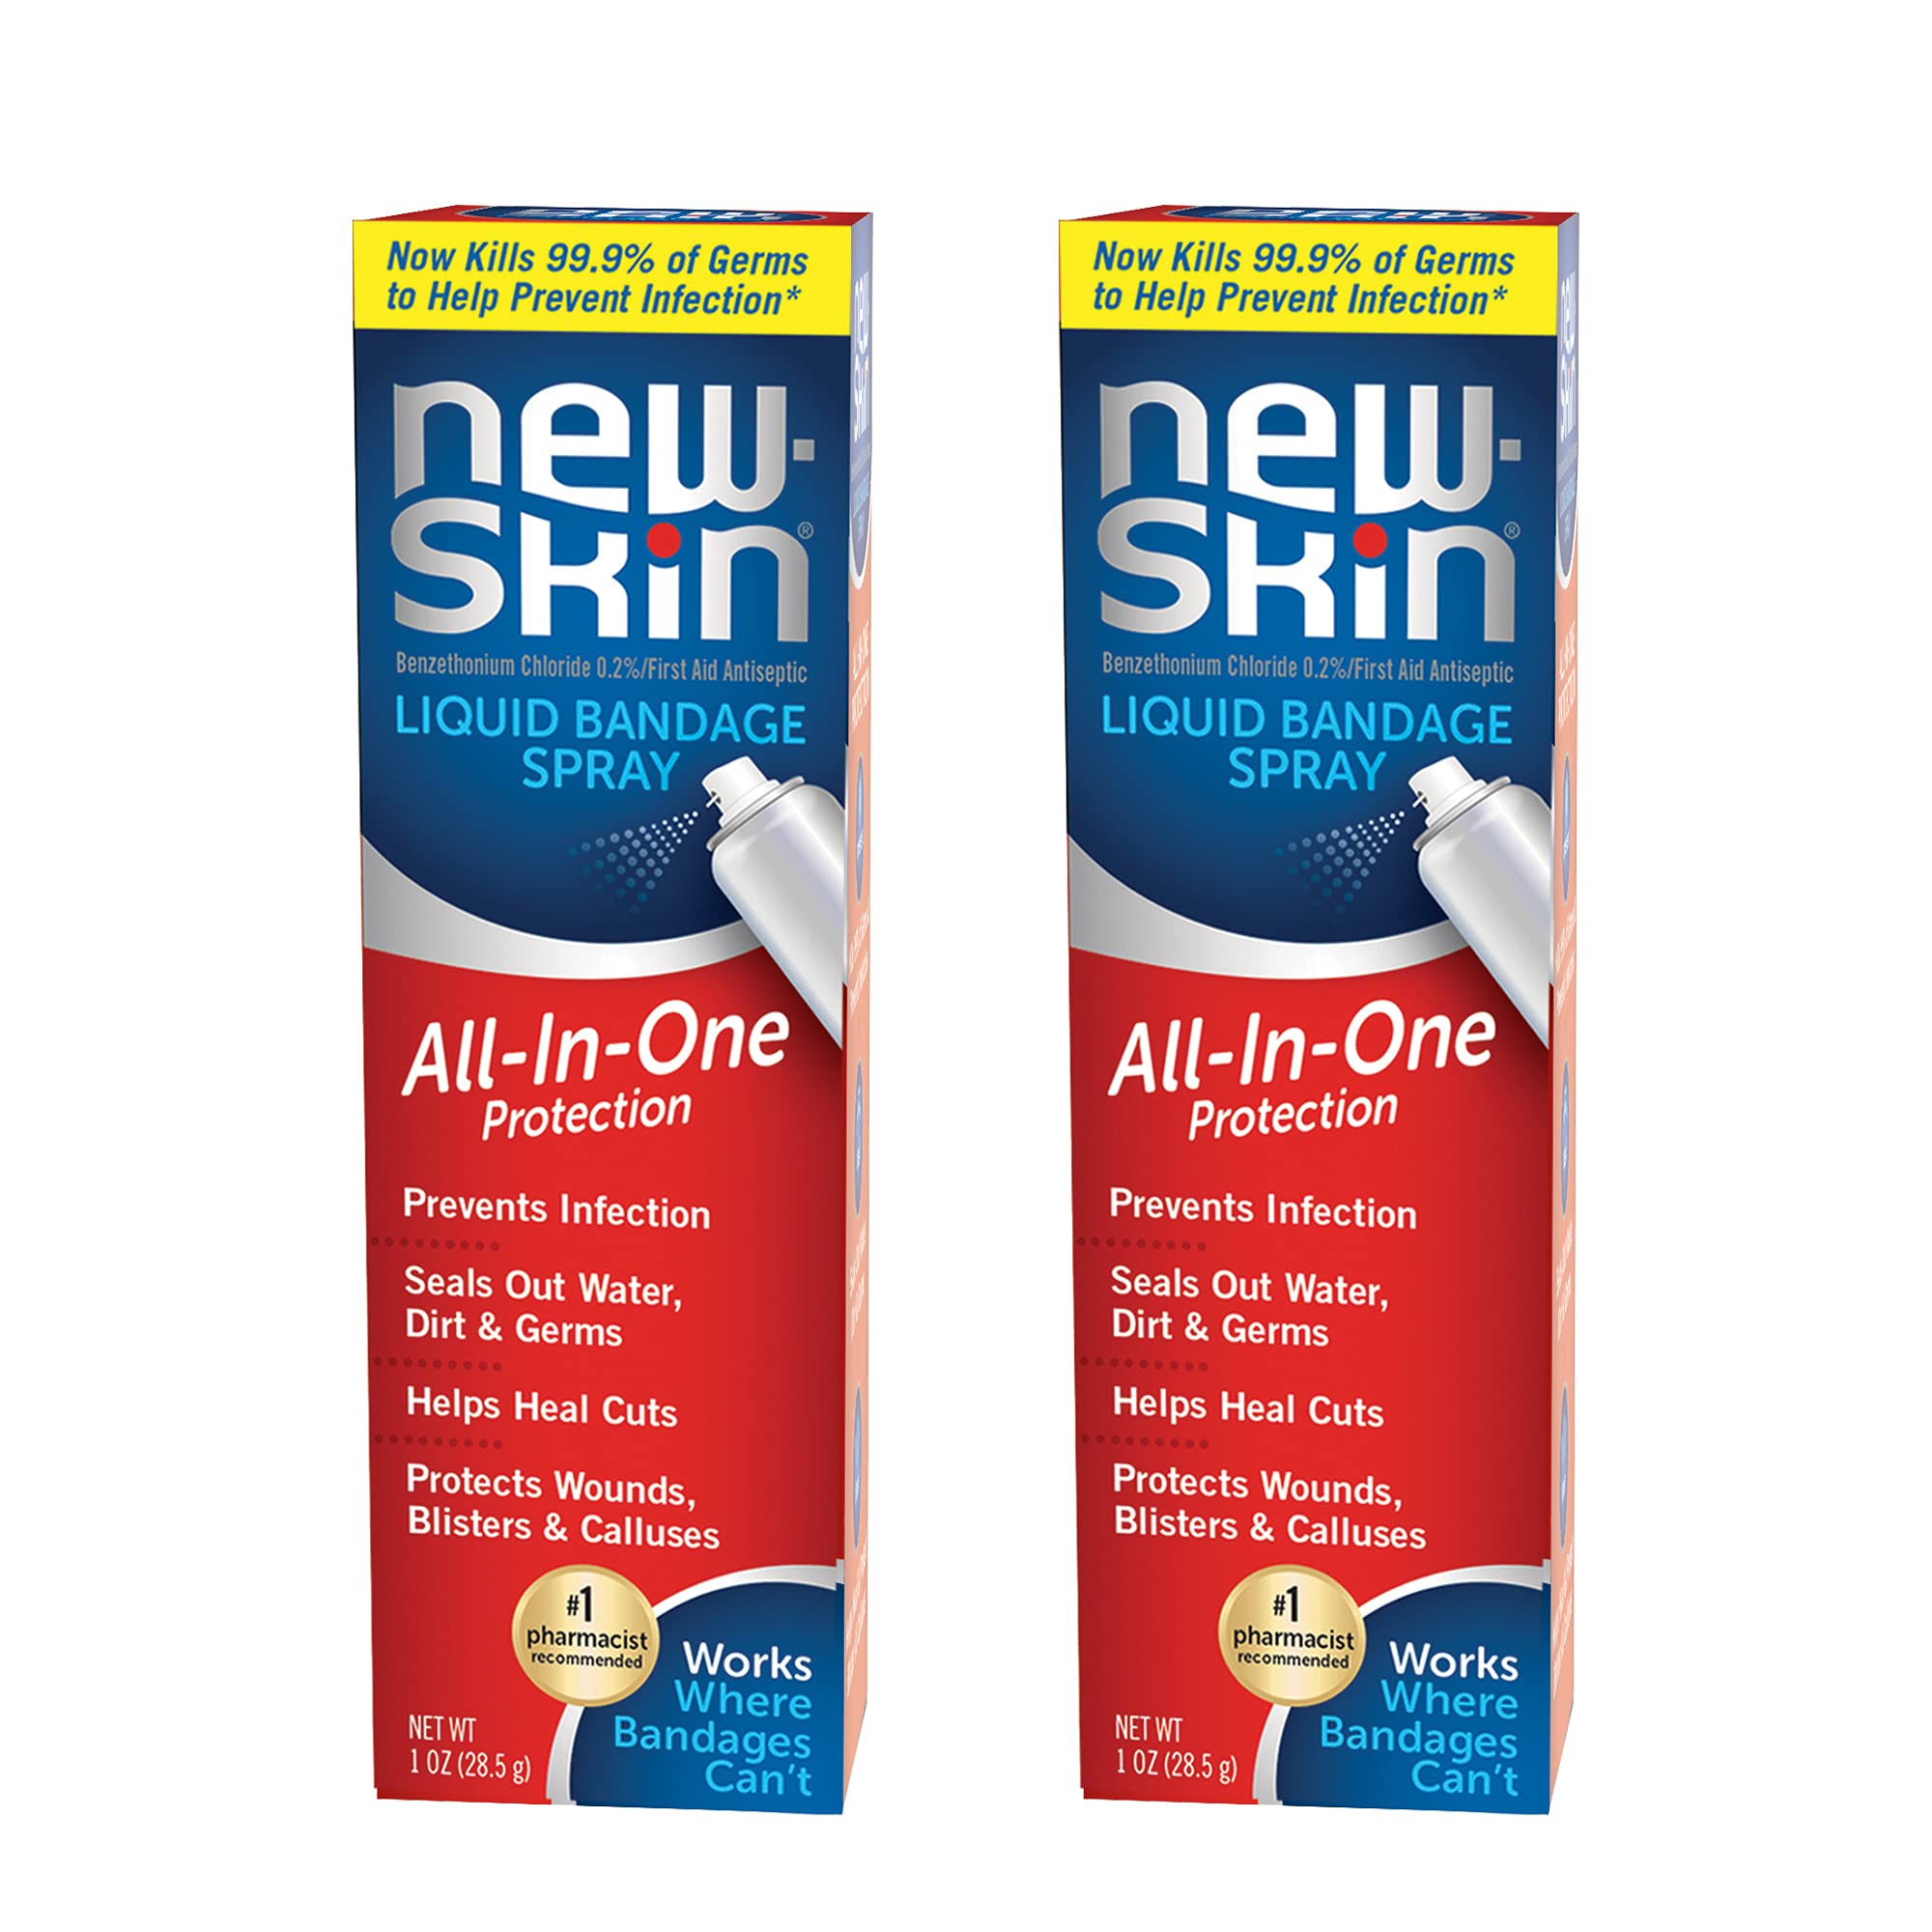 New Skin Antiseptic Liquid Bandage Prevents Infection & Wounds, 1oz, 5-Pack  